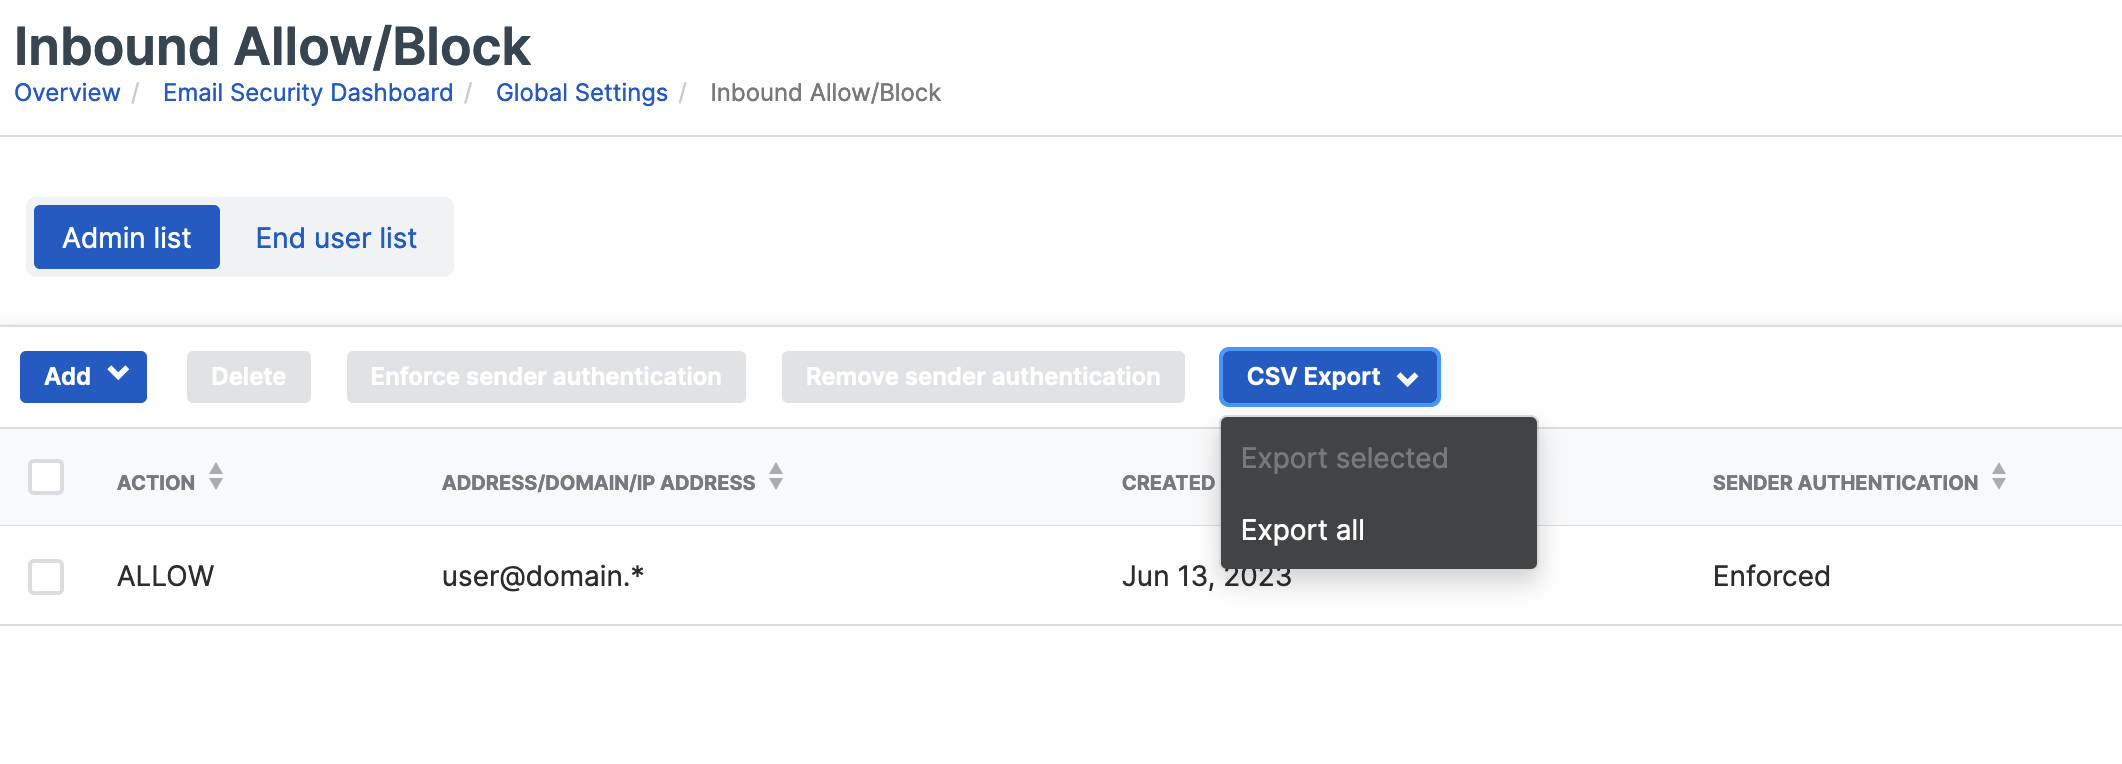 Exporting customer domains and addresses in CSV format.